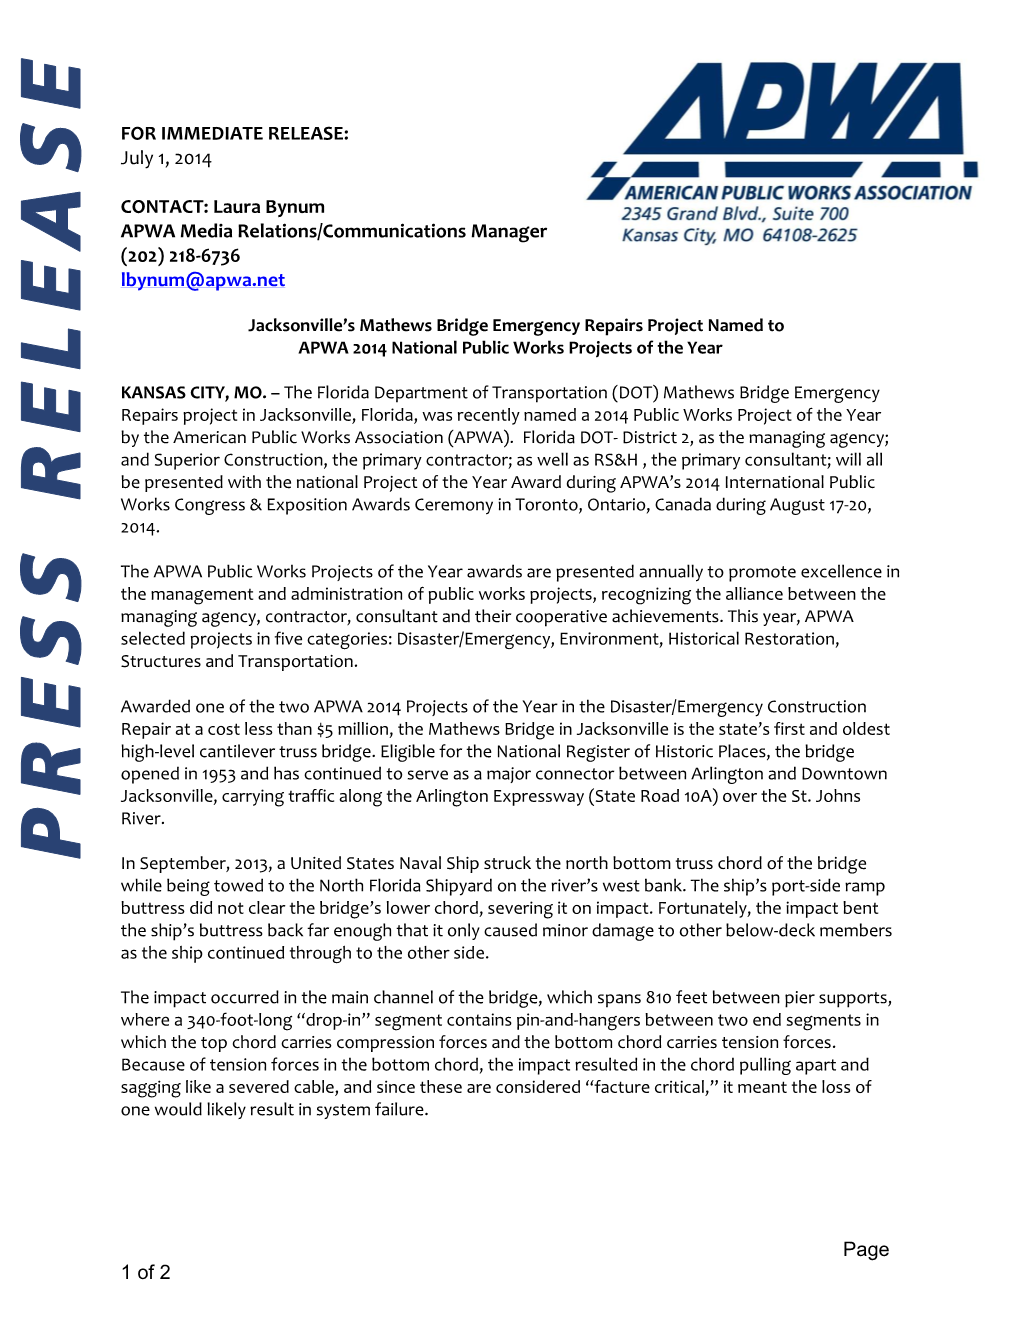 Mathews Bridge Emergency Repairs Project Named to APWA 2014 National Public Works Projects of the Year